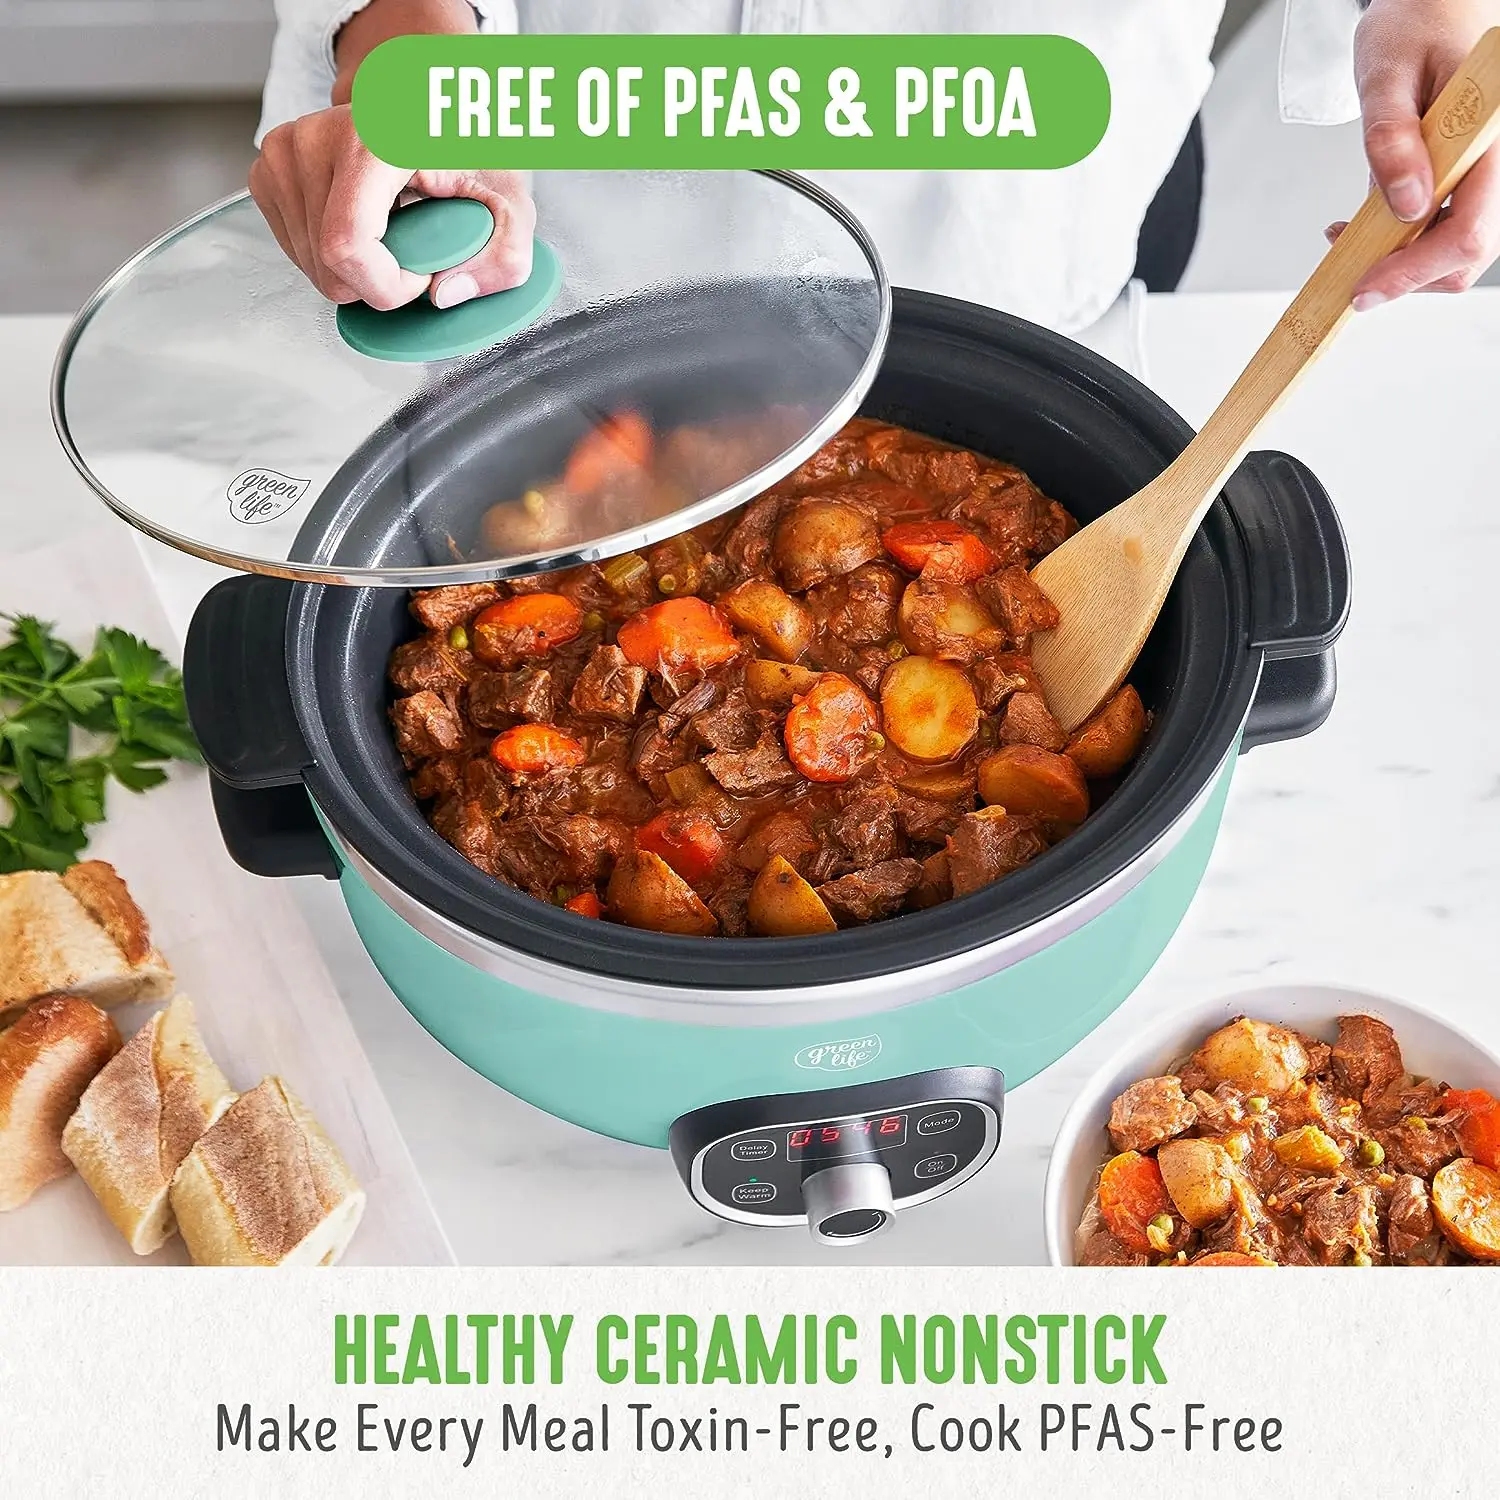 https://ae01.alicdn.com/kf/S97ac352173484ceb9e64864c8110568by/GreenLife-Cook-Duo-Healthy-Ceramic-Nonstick-Programmable-6-Quart-Family-Sized-Slow-Cooker-PFAS-Free-Removable.jpg